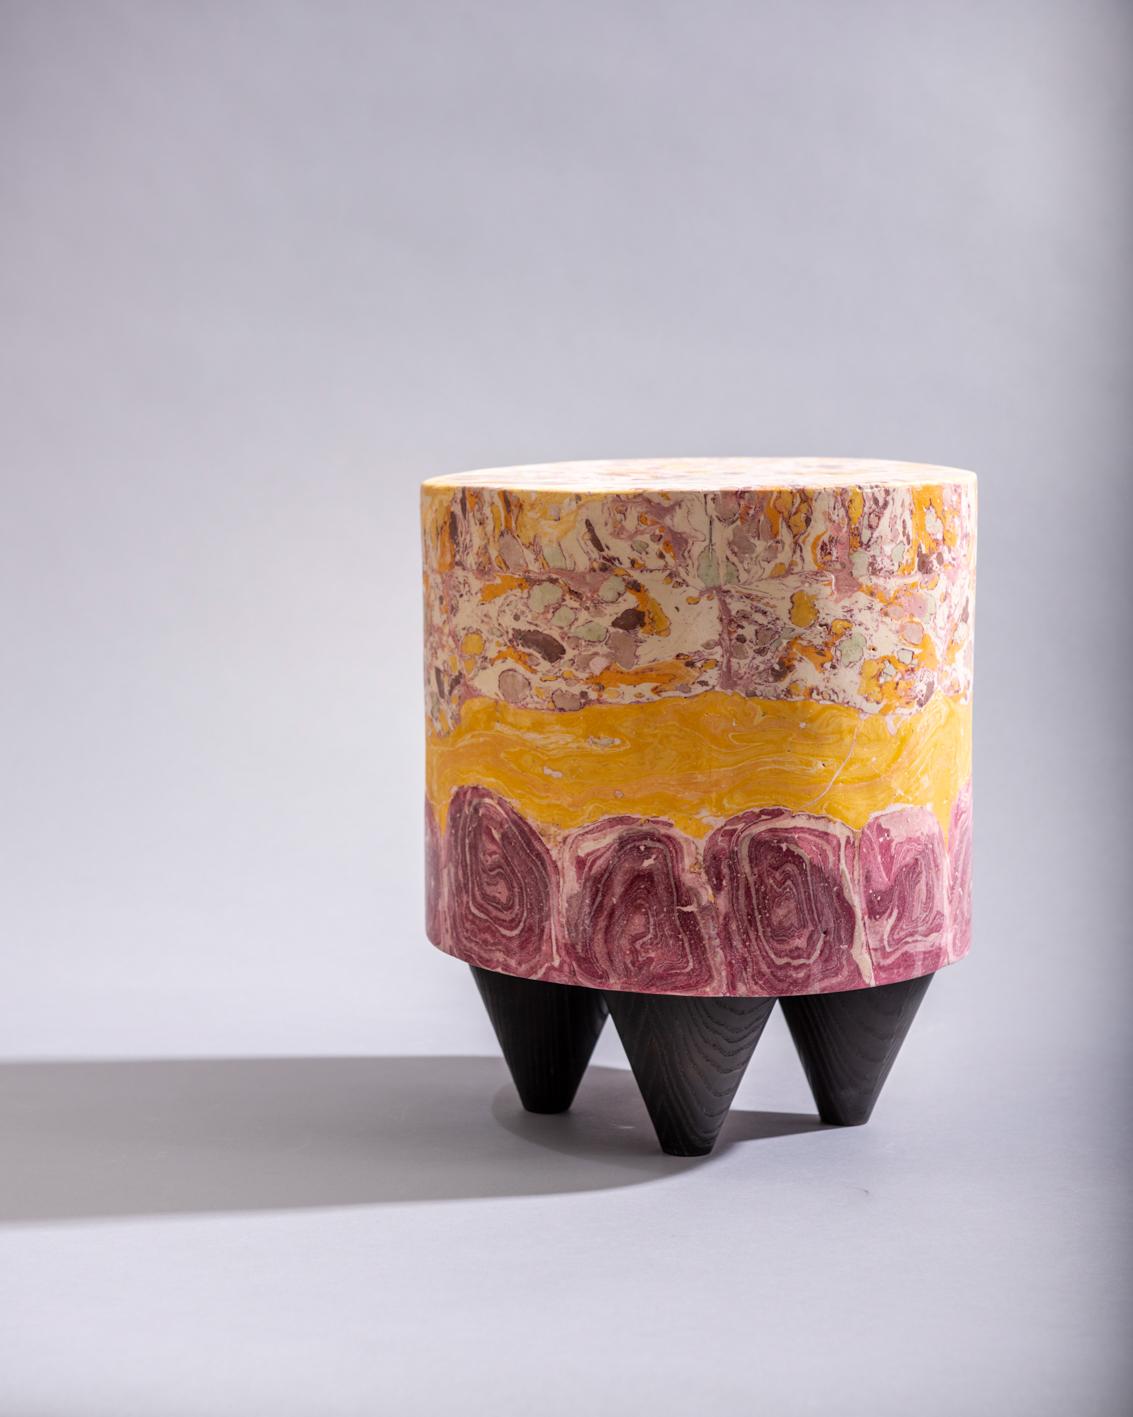 Hand-Crafted “Trifle” Contemporary Stool or Side Table by Studio Morison for General Life